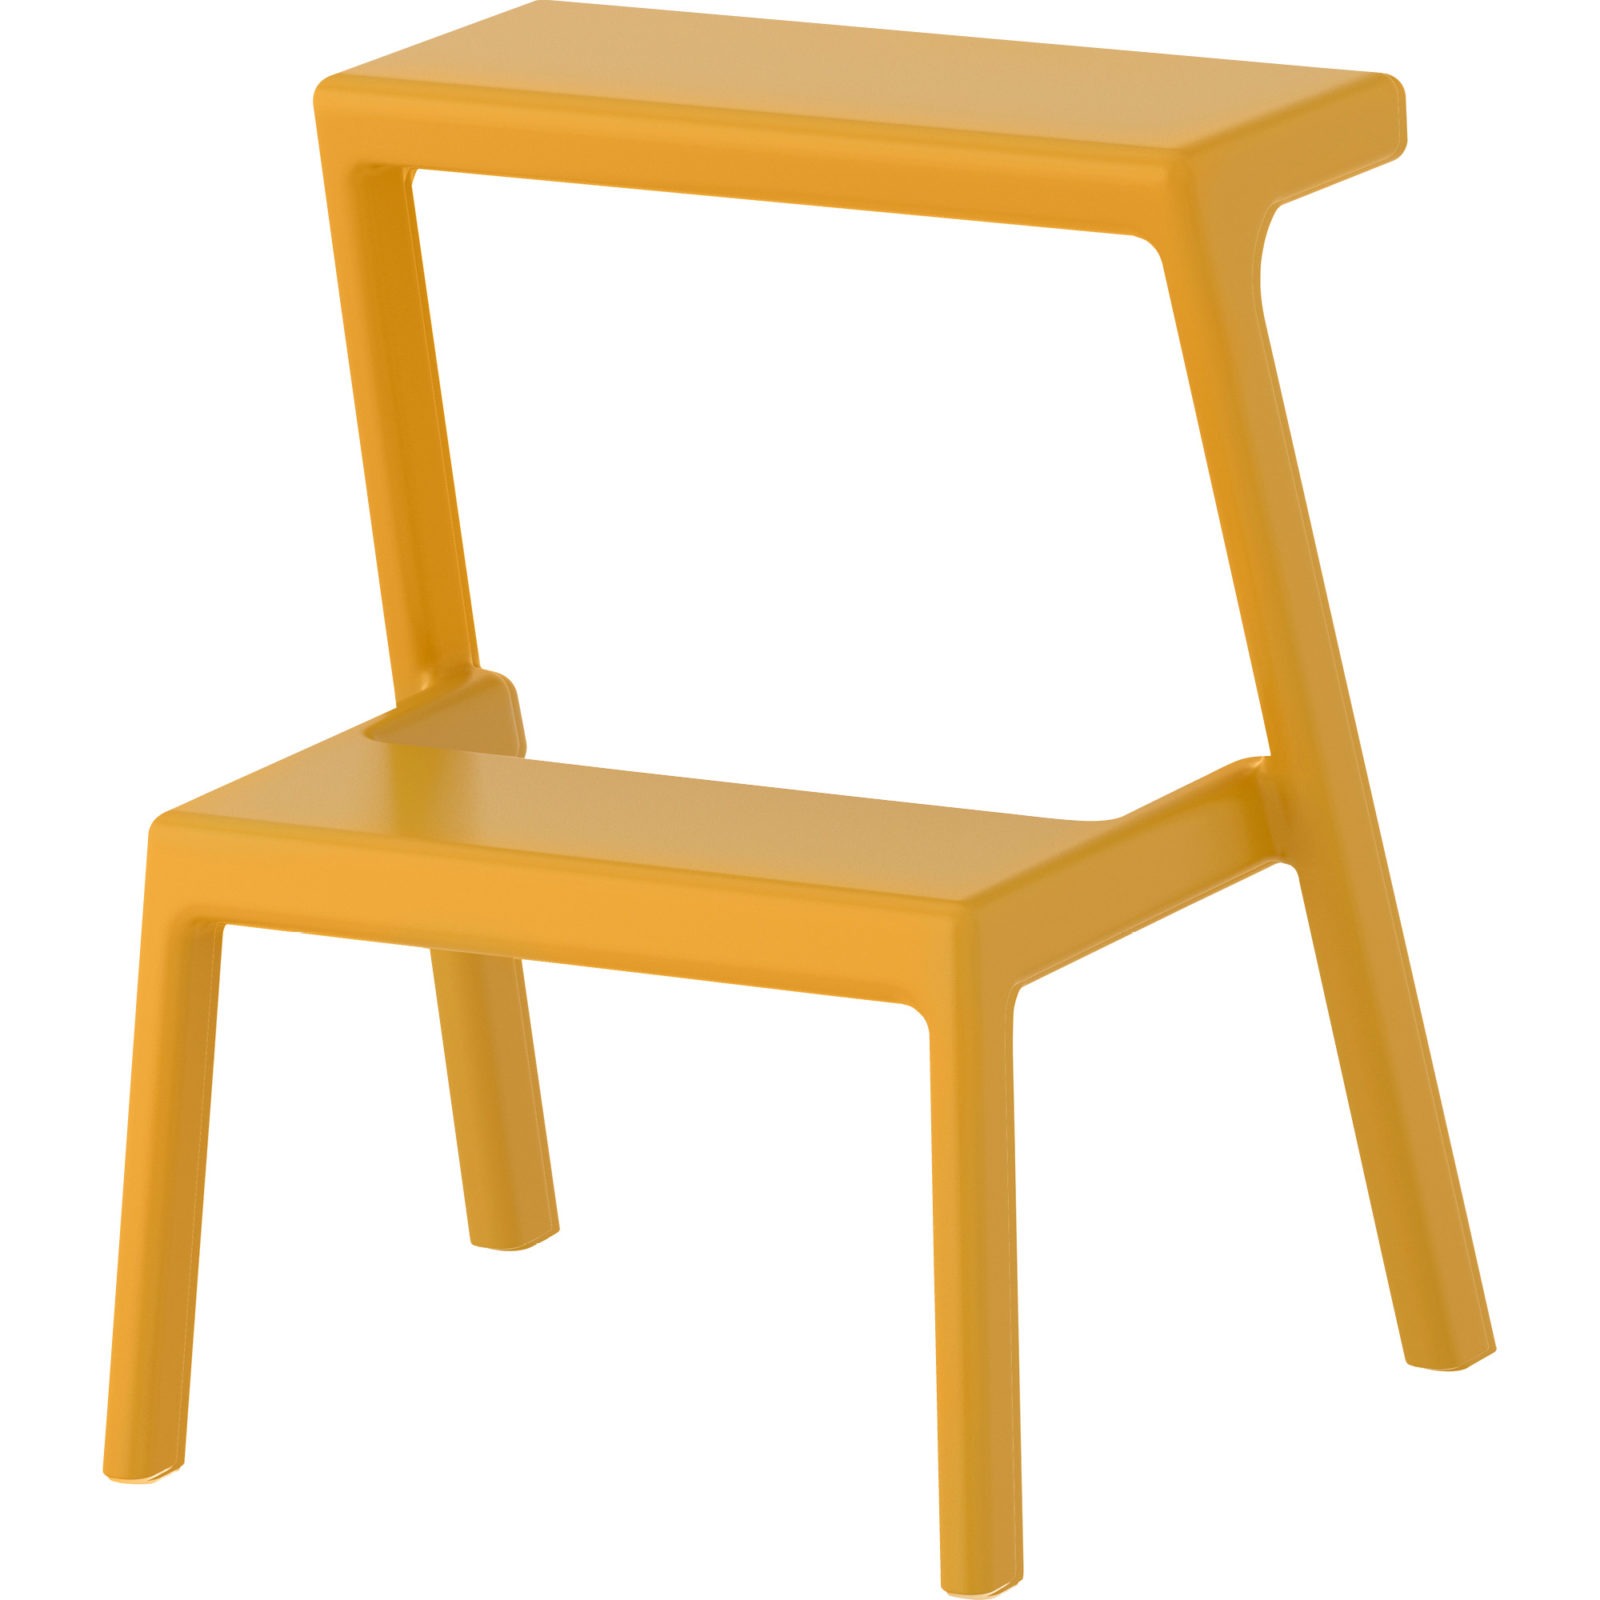 Yellow plastic step stool designed in a single piece, MÄSTERBY.